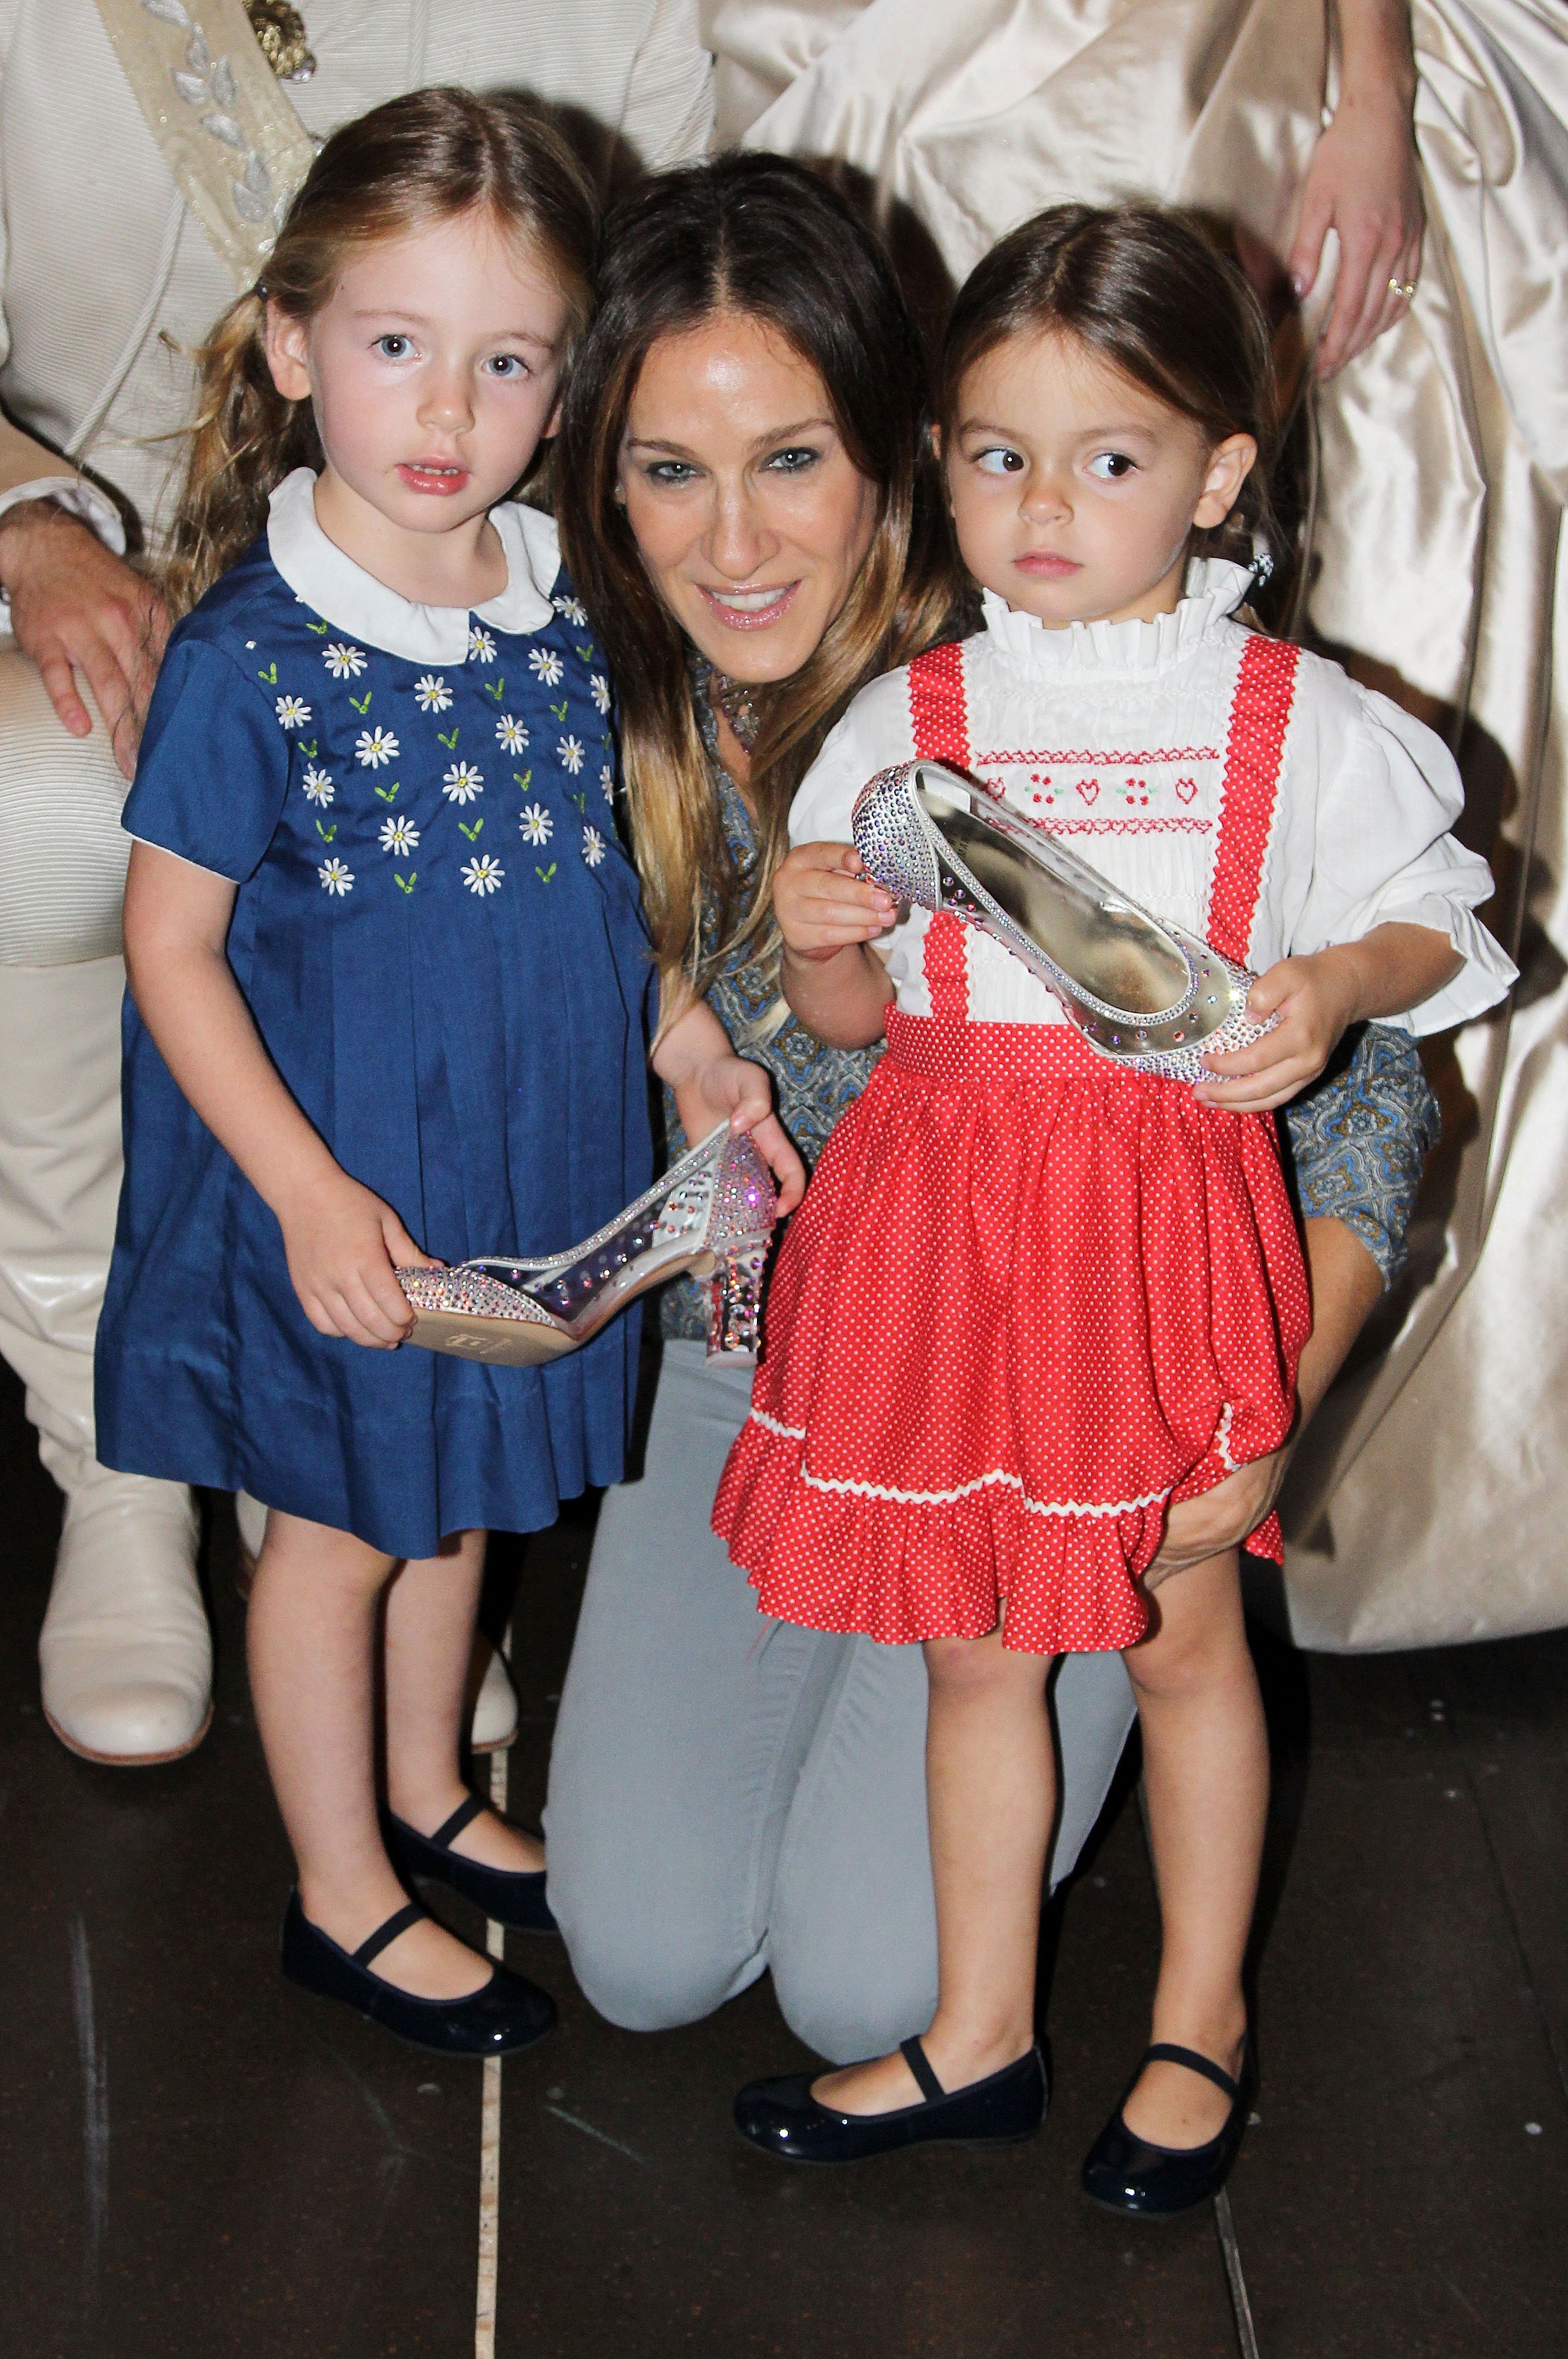 Marion Loretta Elwell Broderick, mother Sarah Jessica Parker and Tabitha Hodge Broderick on September 29, 2013 in New York City. | Source: Getty Images